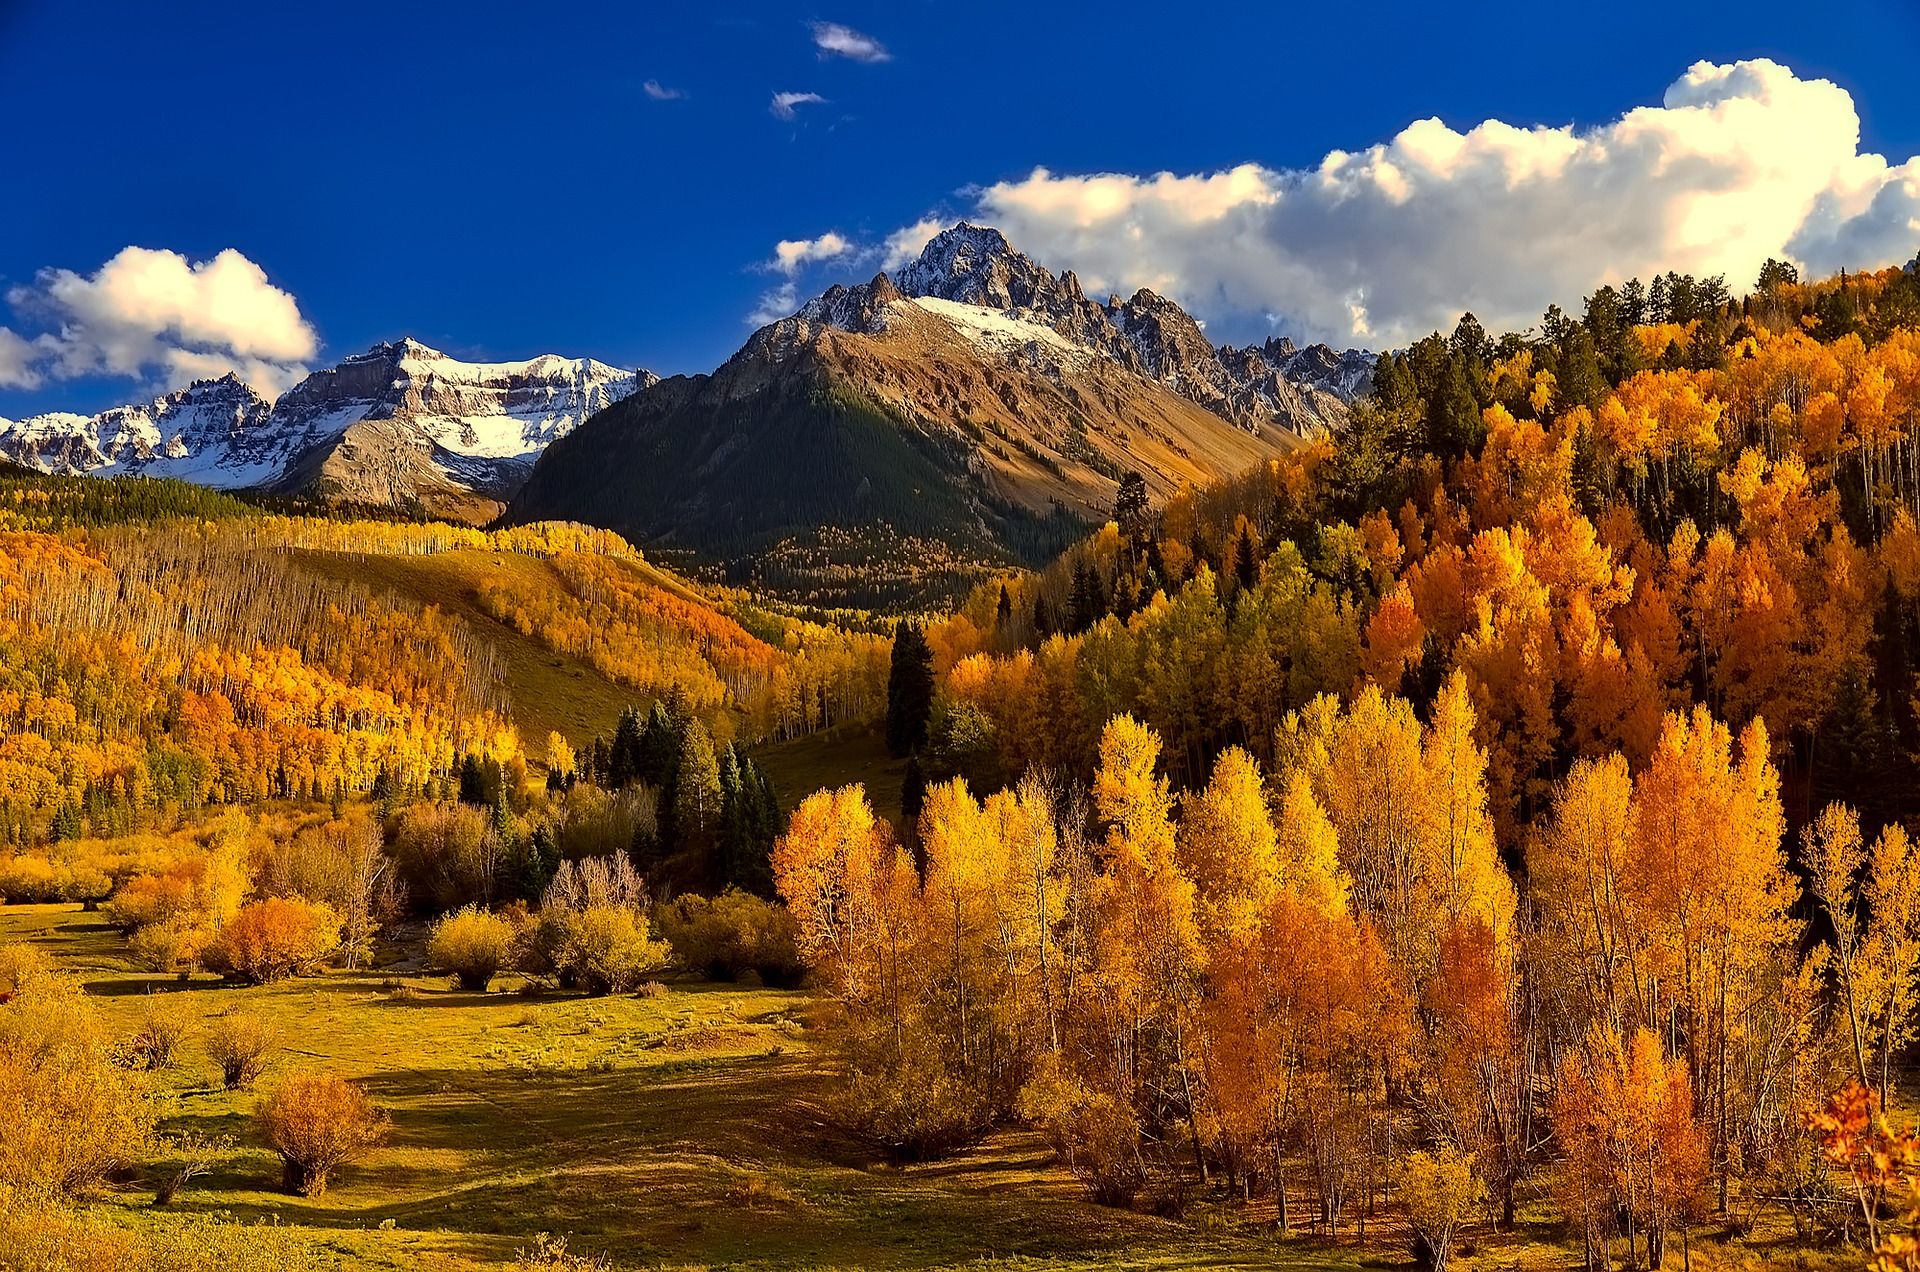 Autumnal Equinox 2020: The First Day of Fall. Facts, Folklore & More. The Old Farmer's Almanac